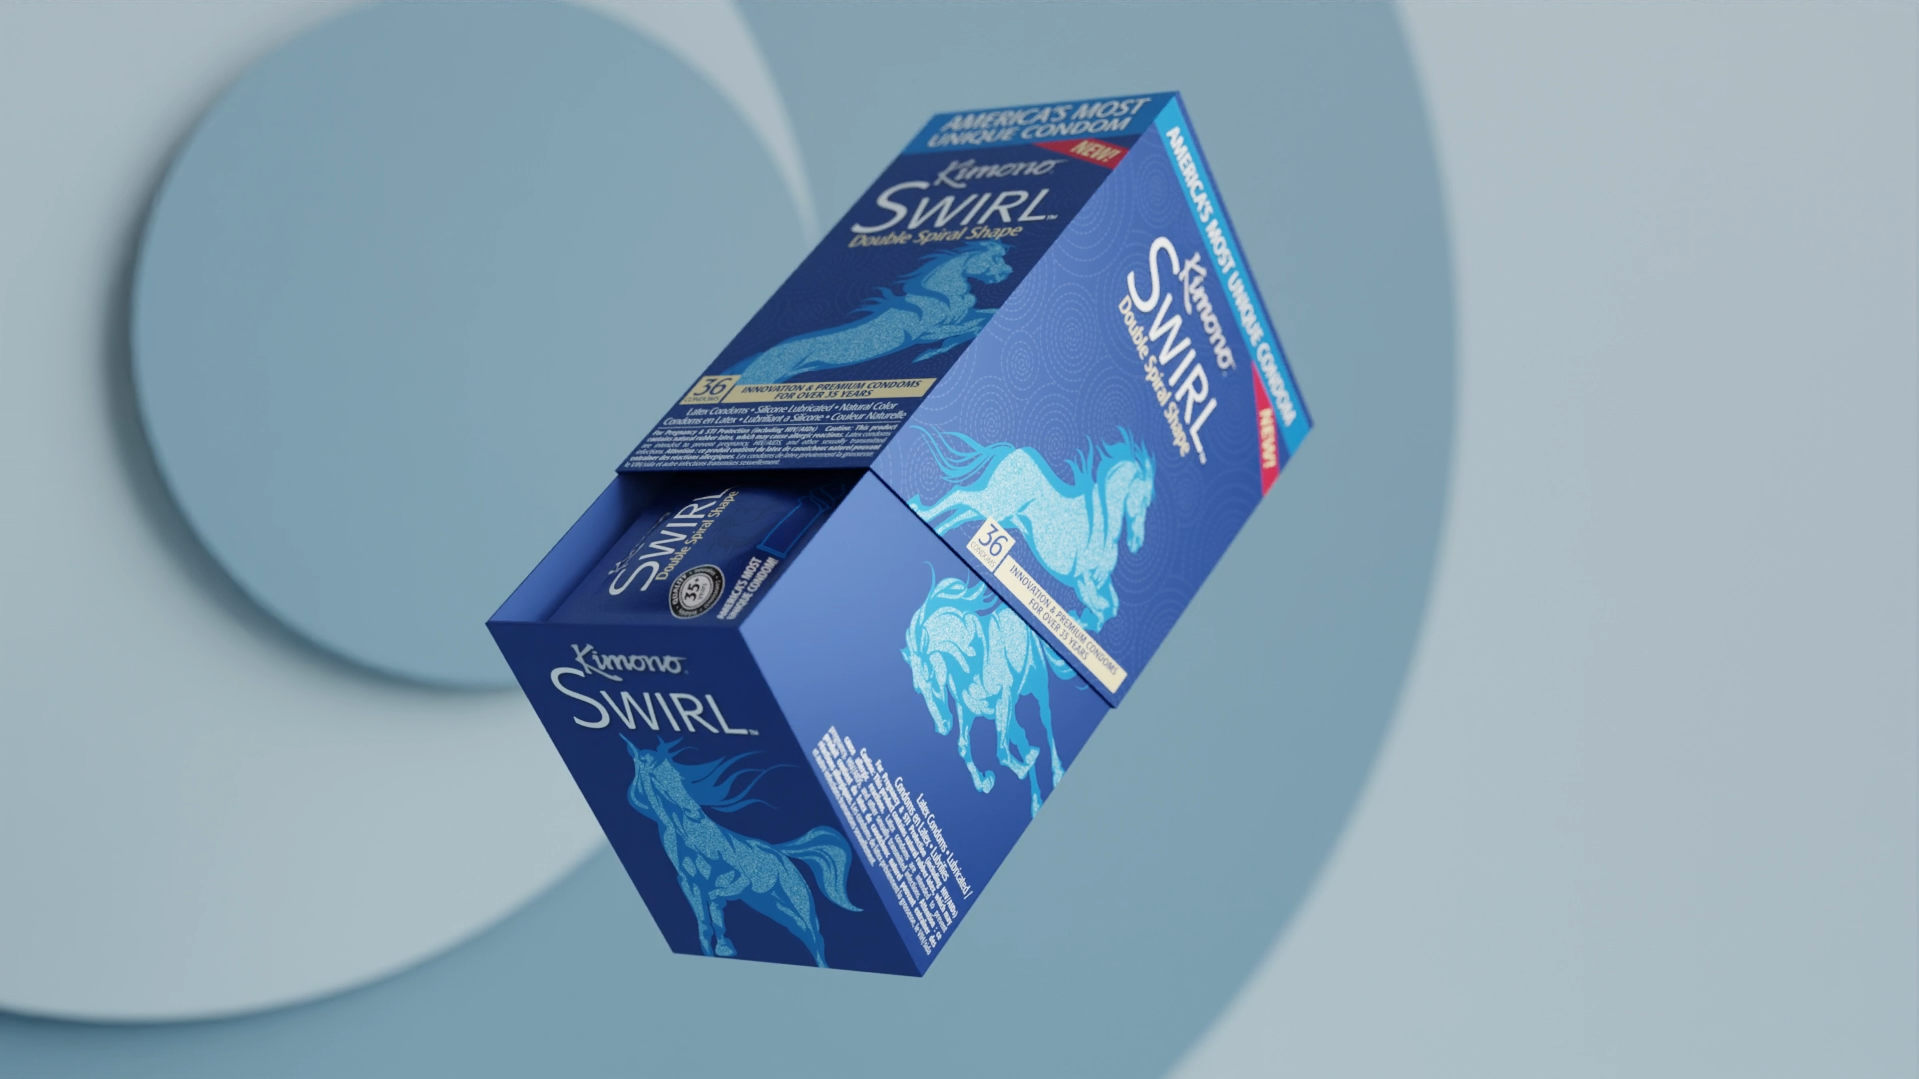 Cargar video: Kimono Swirl condoms, America&#39;s only double helix shaped condom. The condom is revealed out of the packaging. It uses premium natural latex. Less constriction, more comfort. Double swirl for added comfort, friction, and energy. For him, her, and them. What are you waiting for? Get your swirl on.